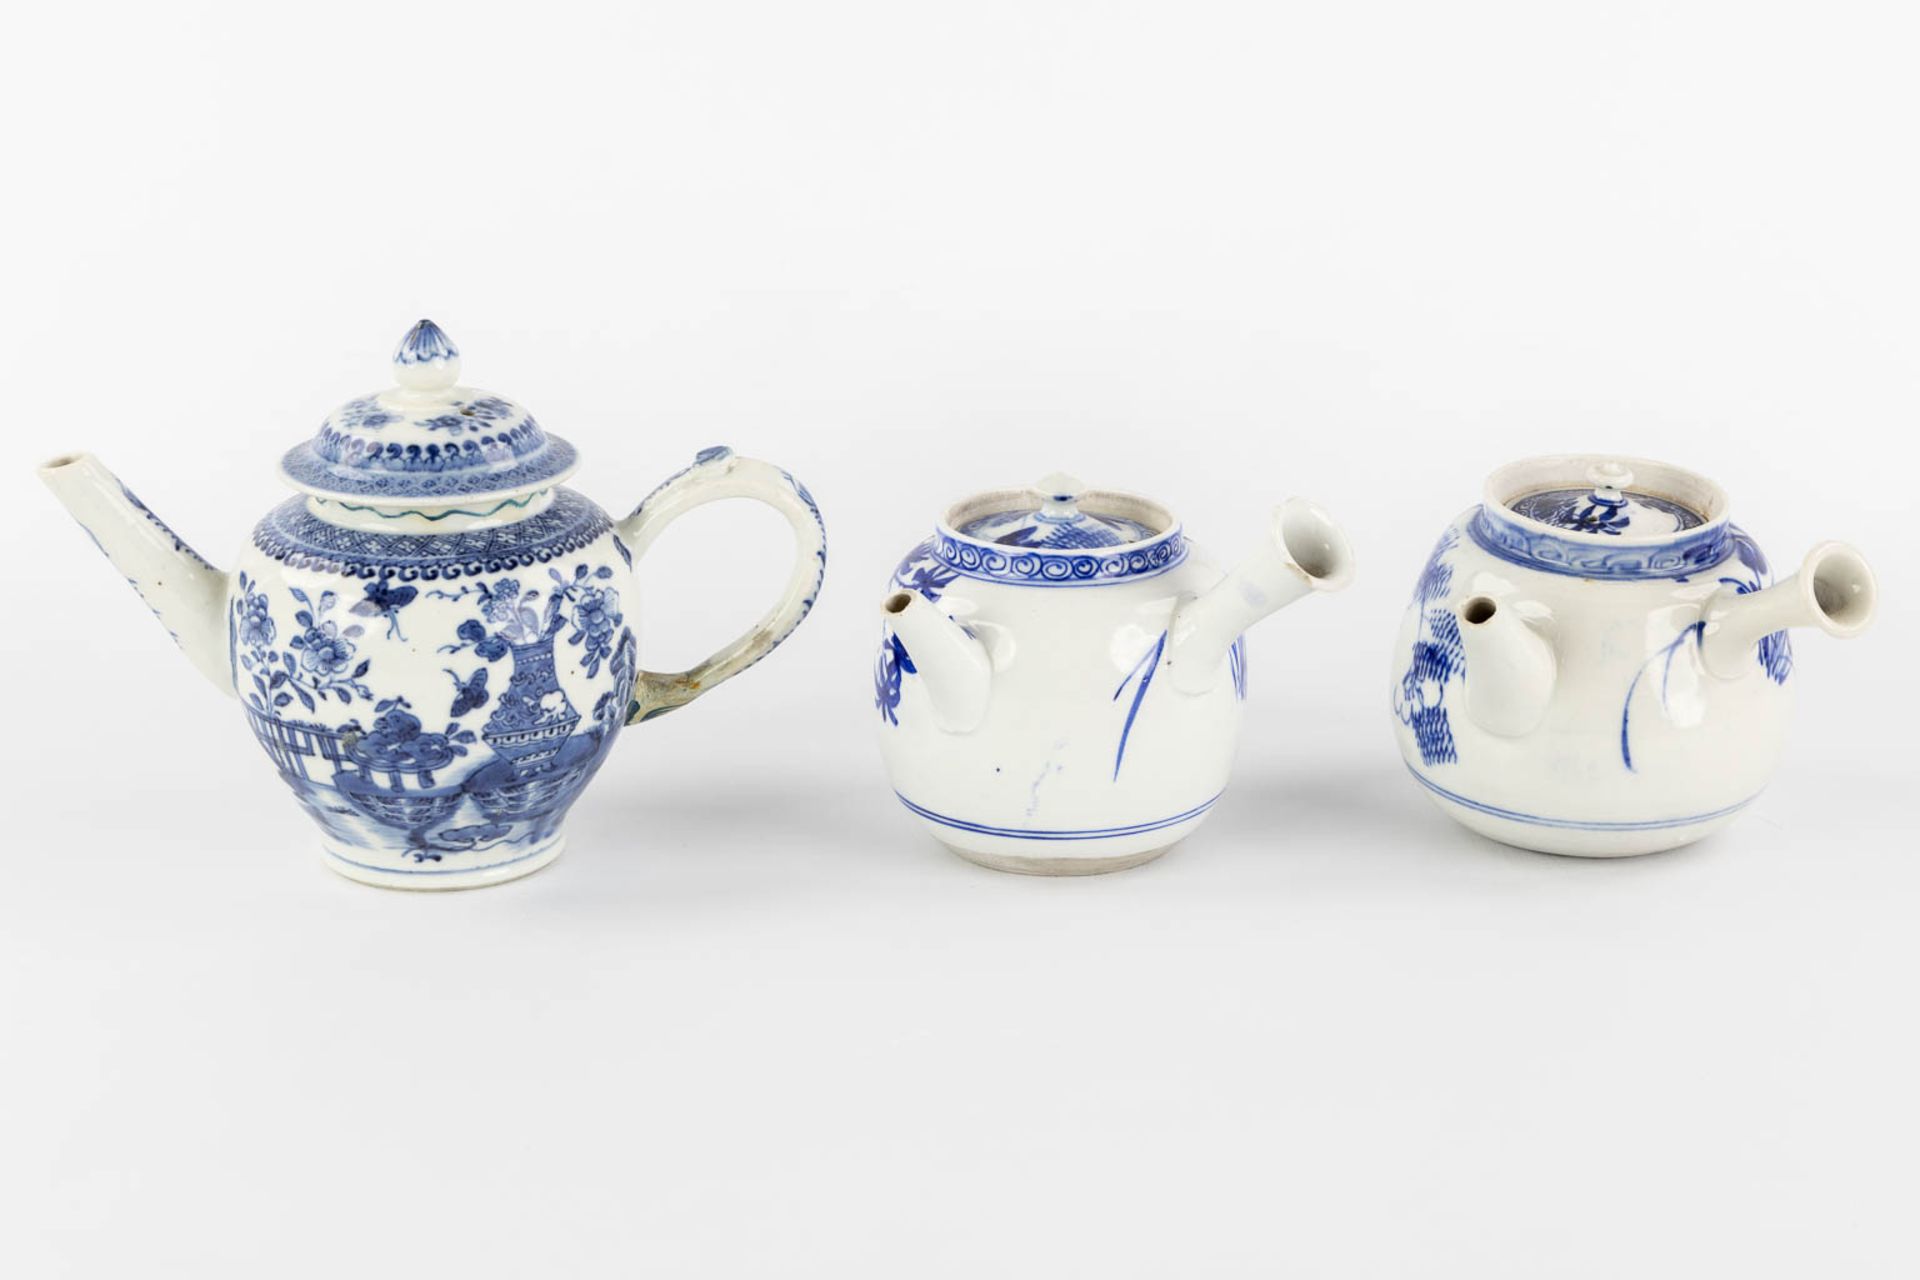 Three Chinese and Japanese teapots, blue-white decor. (W:20 x H:14 cm) - Image 5 of 17